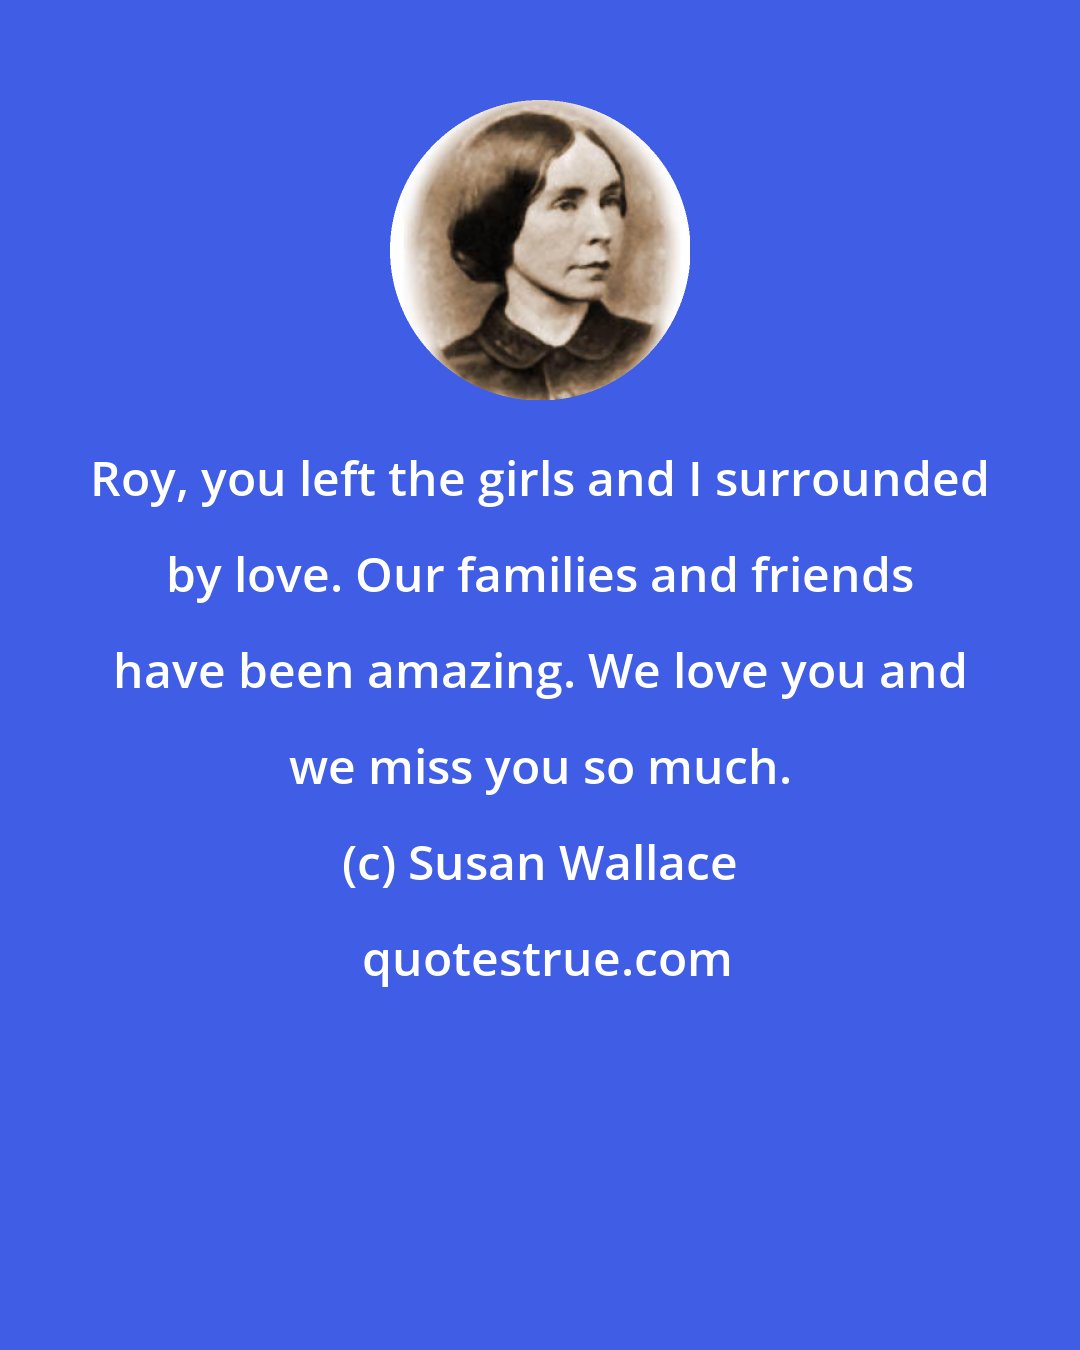 Susan Wallace: Roy, you left the girls and I surrounded by love. Our families and friends have been amazing. We love you and we miss you so much.